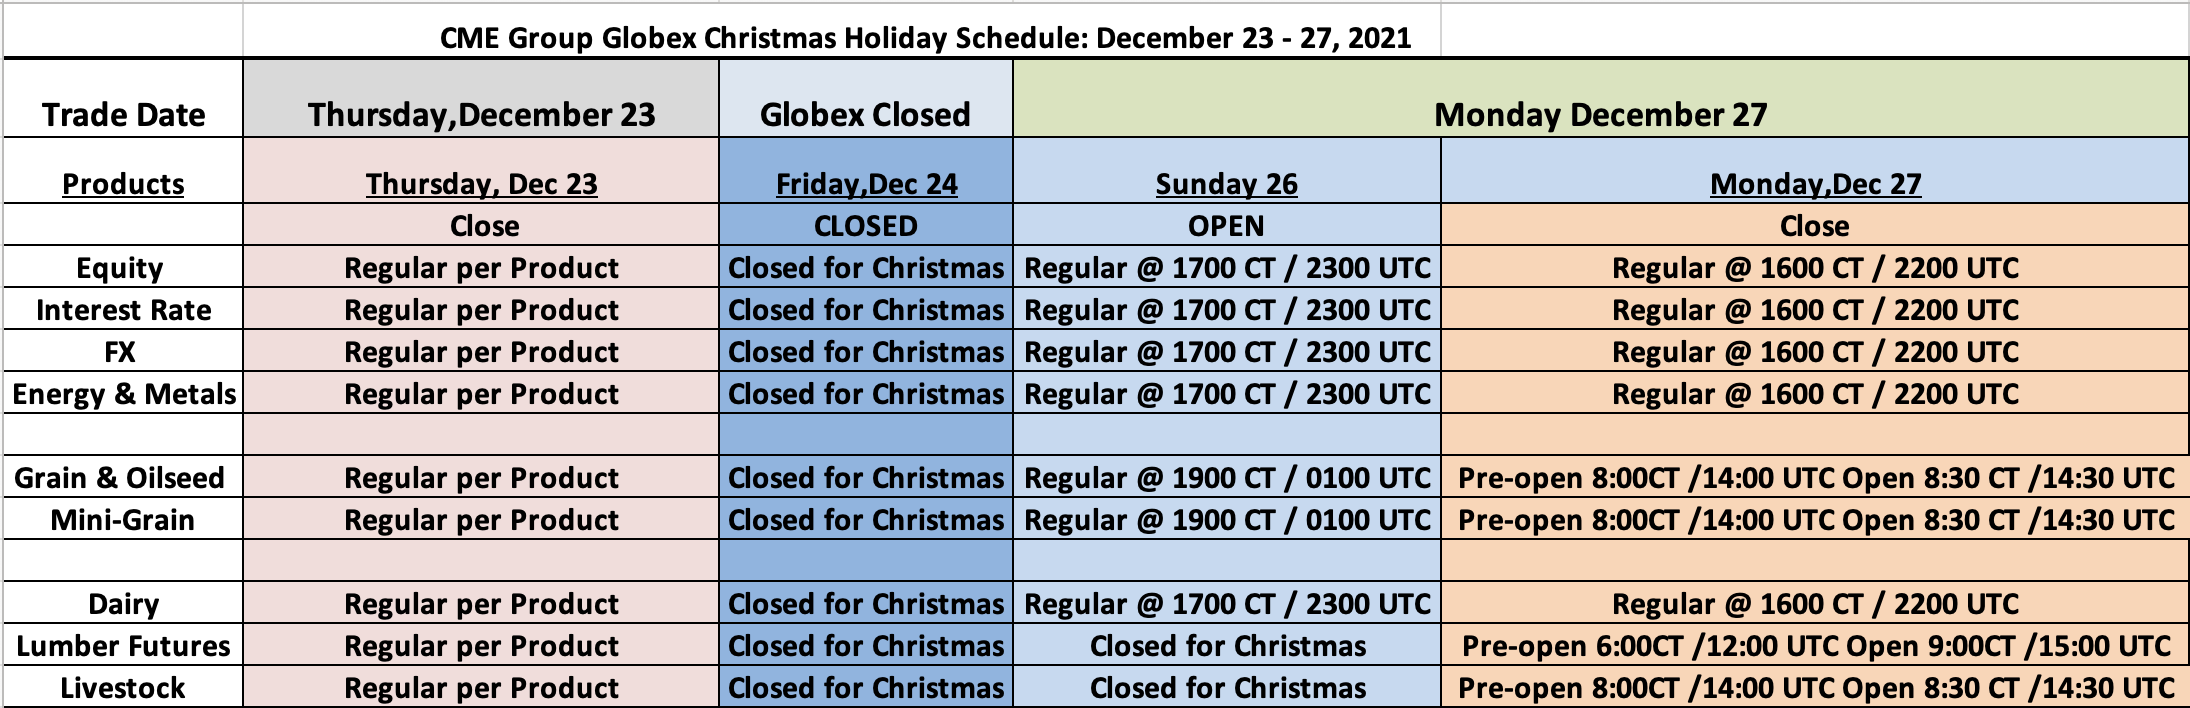 Christmas Holiday Trading Schedule 2021